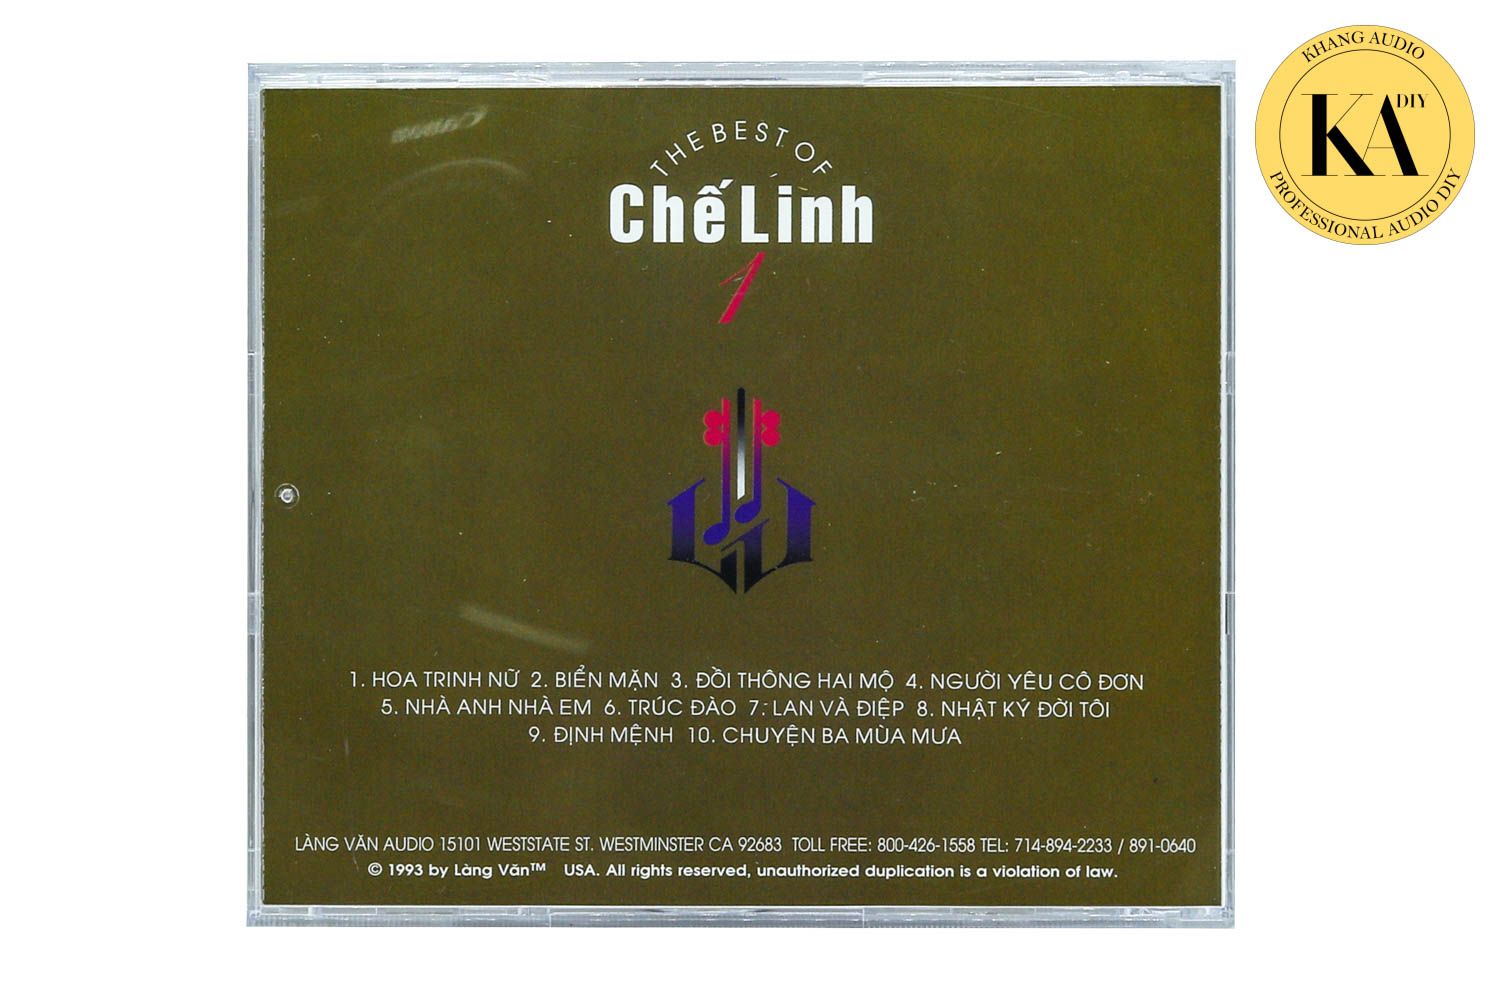 The Best Of Chế Linh - Chế Linh Khang Audio 0336380099